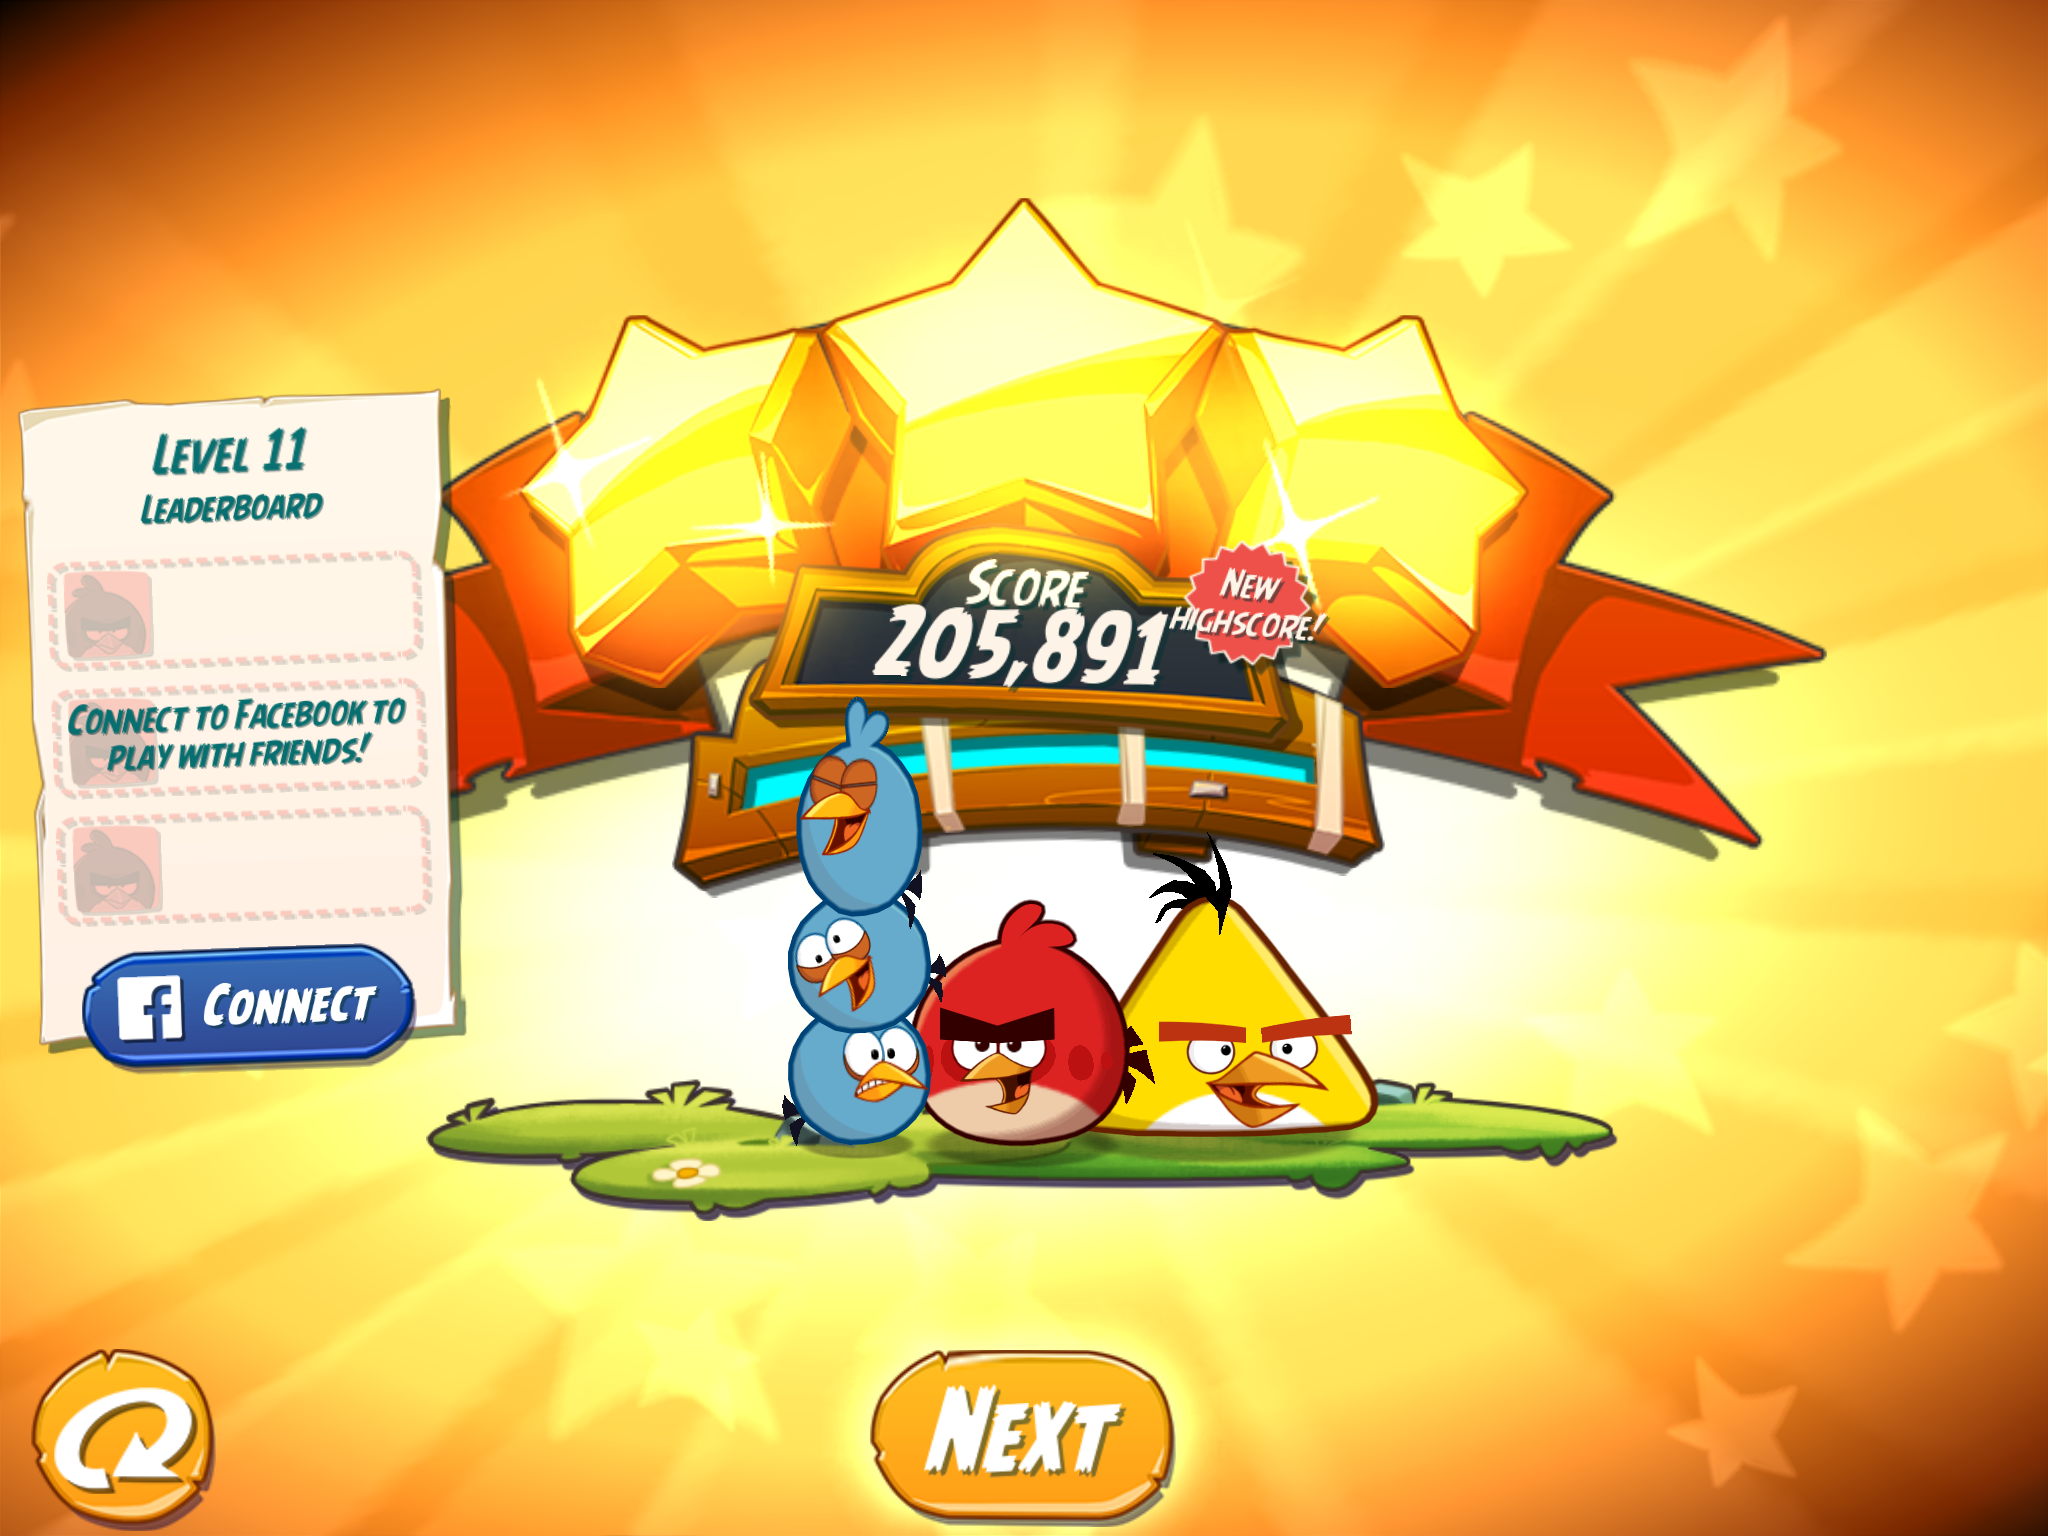 Angry Birds 2: Level 11 205,891 points